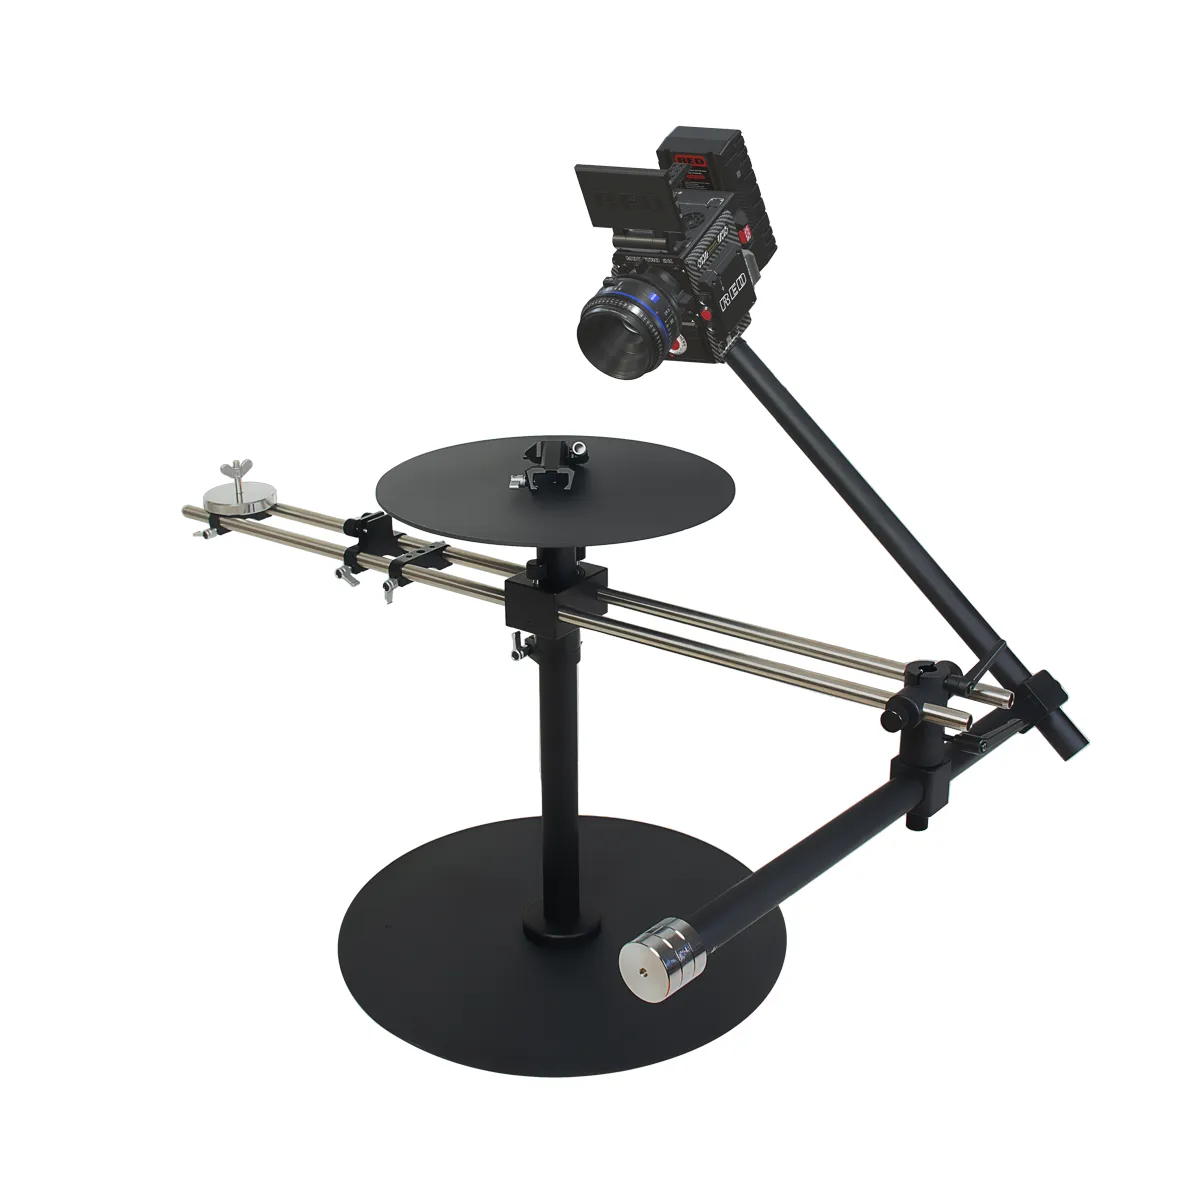 2 Axis 360° Spinning Camera Rig Video Rotating Platform for Filmmakers & Videographers